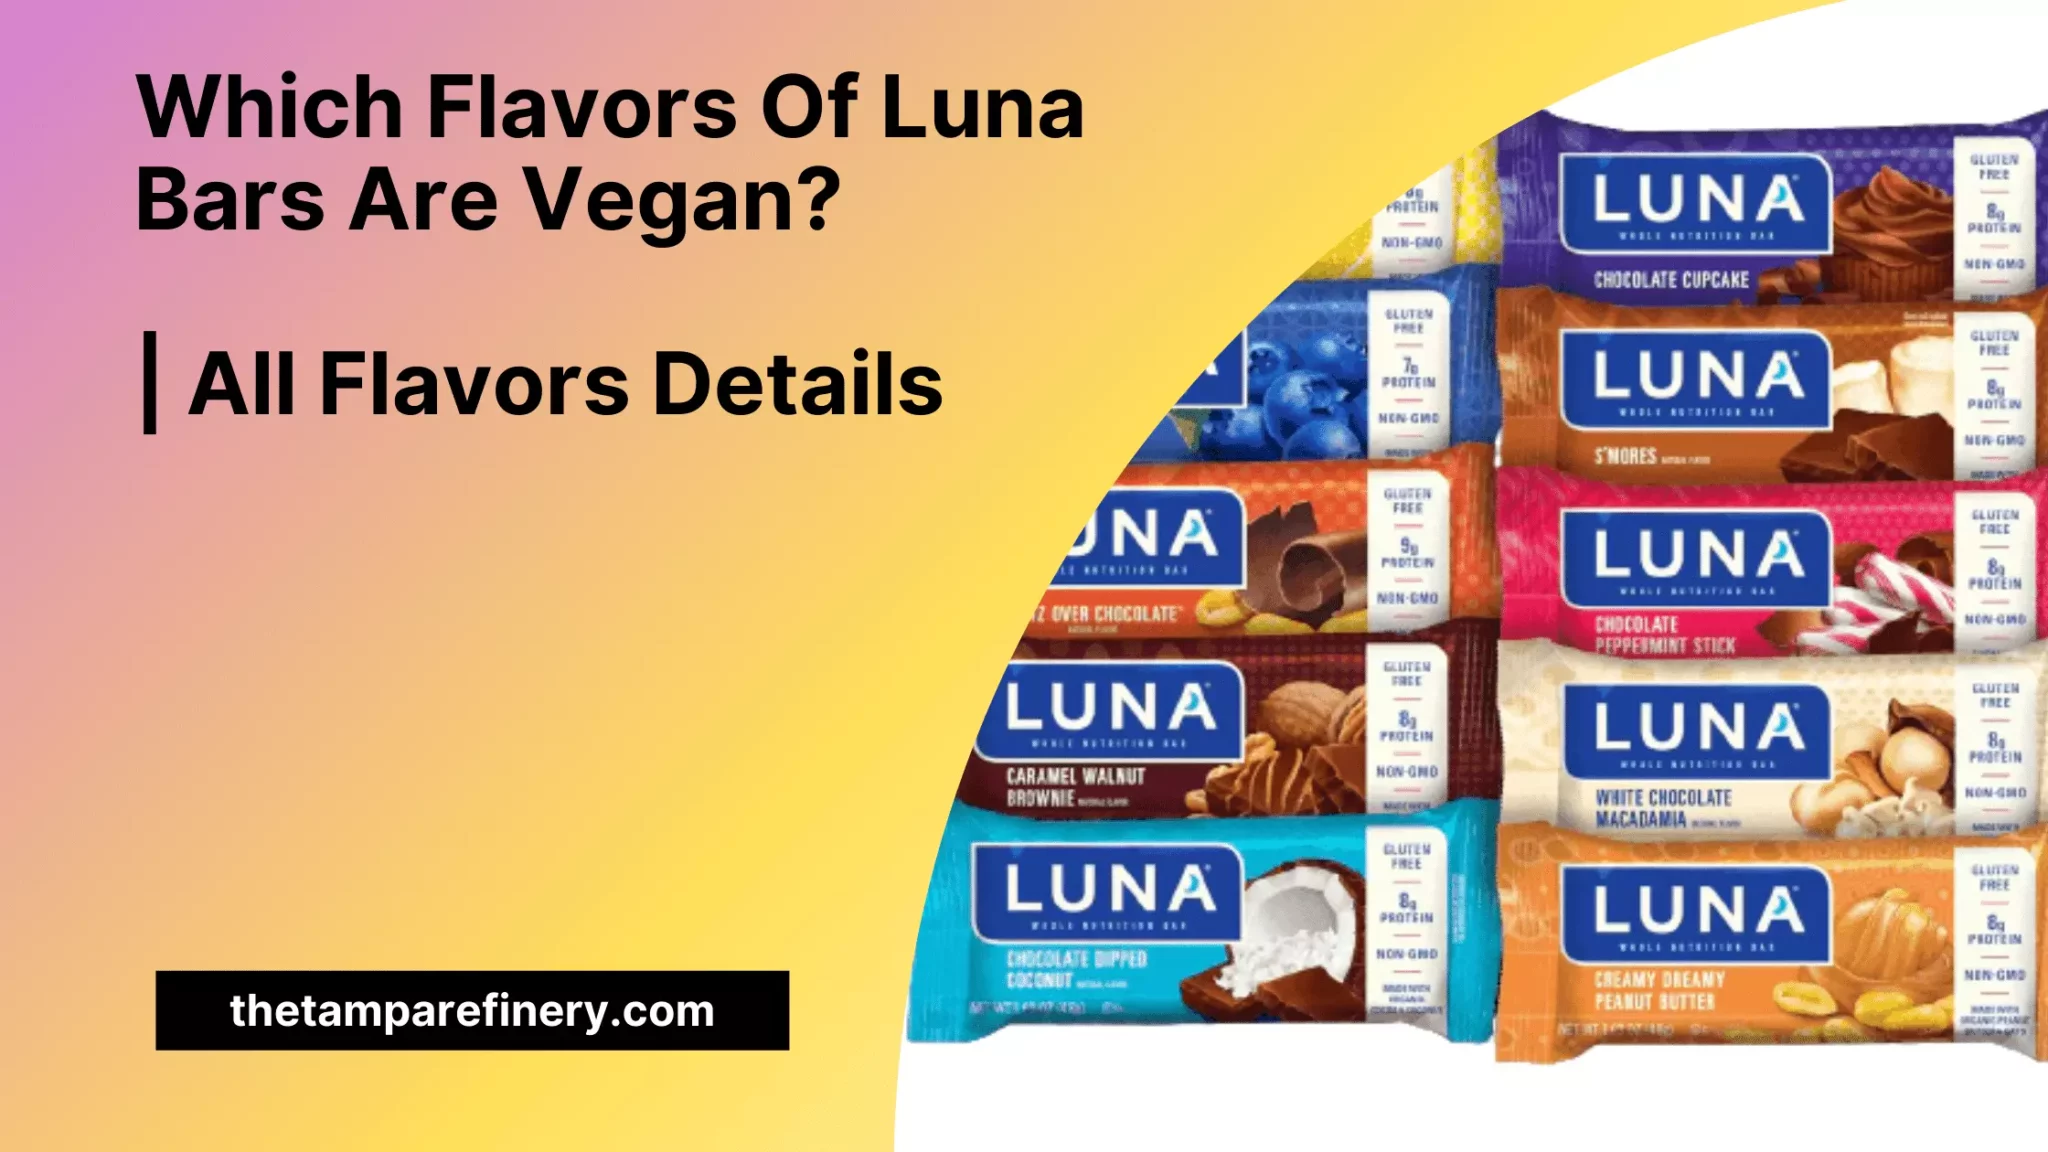 Which Flavors Of Luna Bars Are Vegan